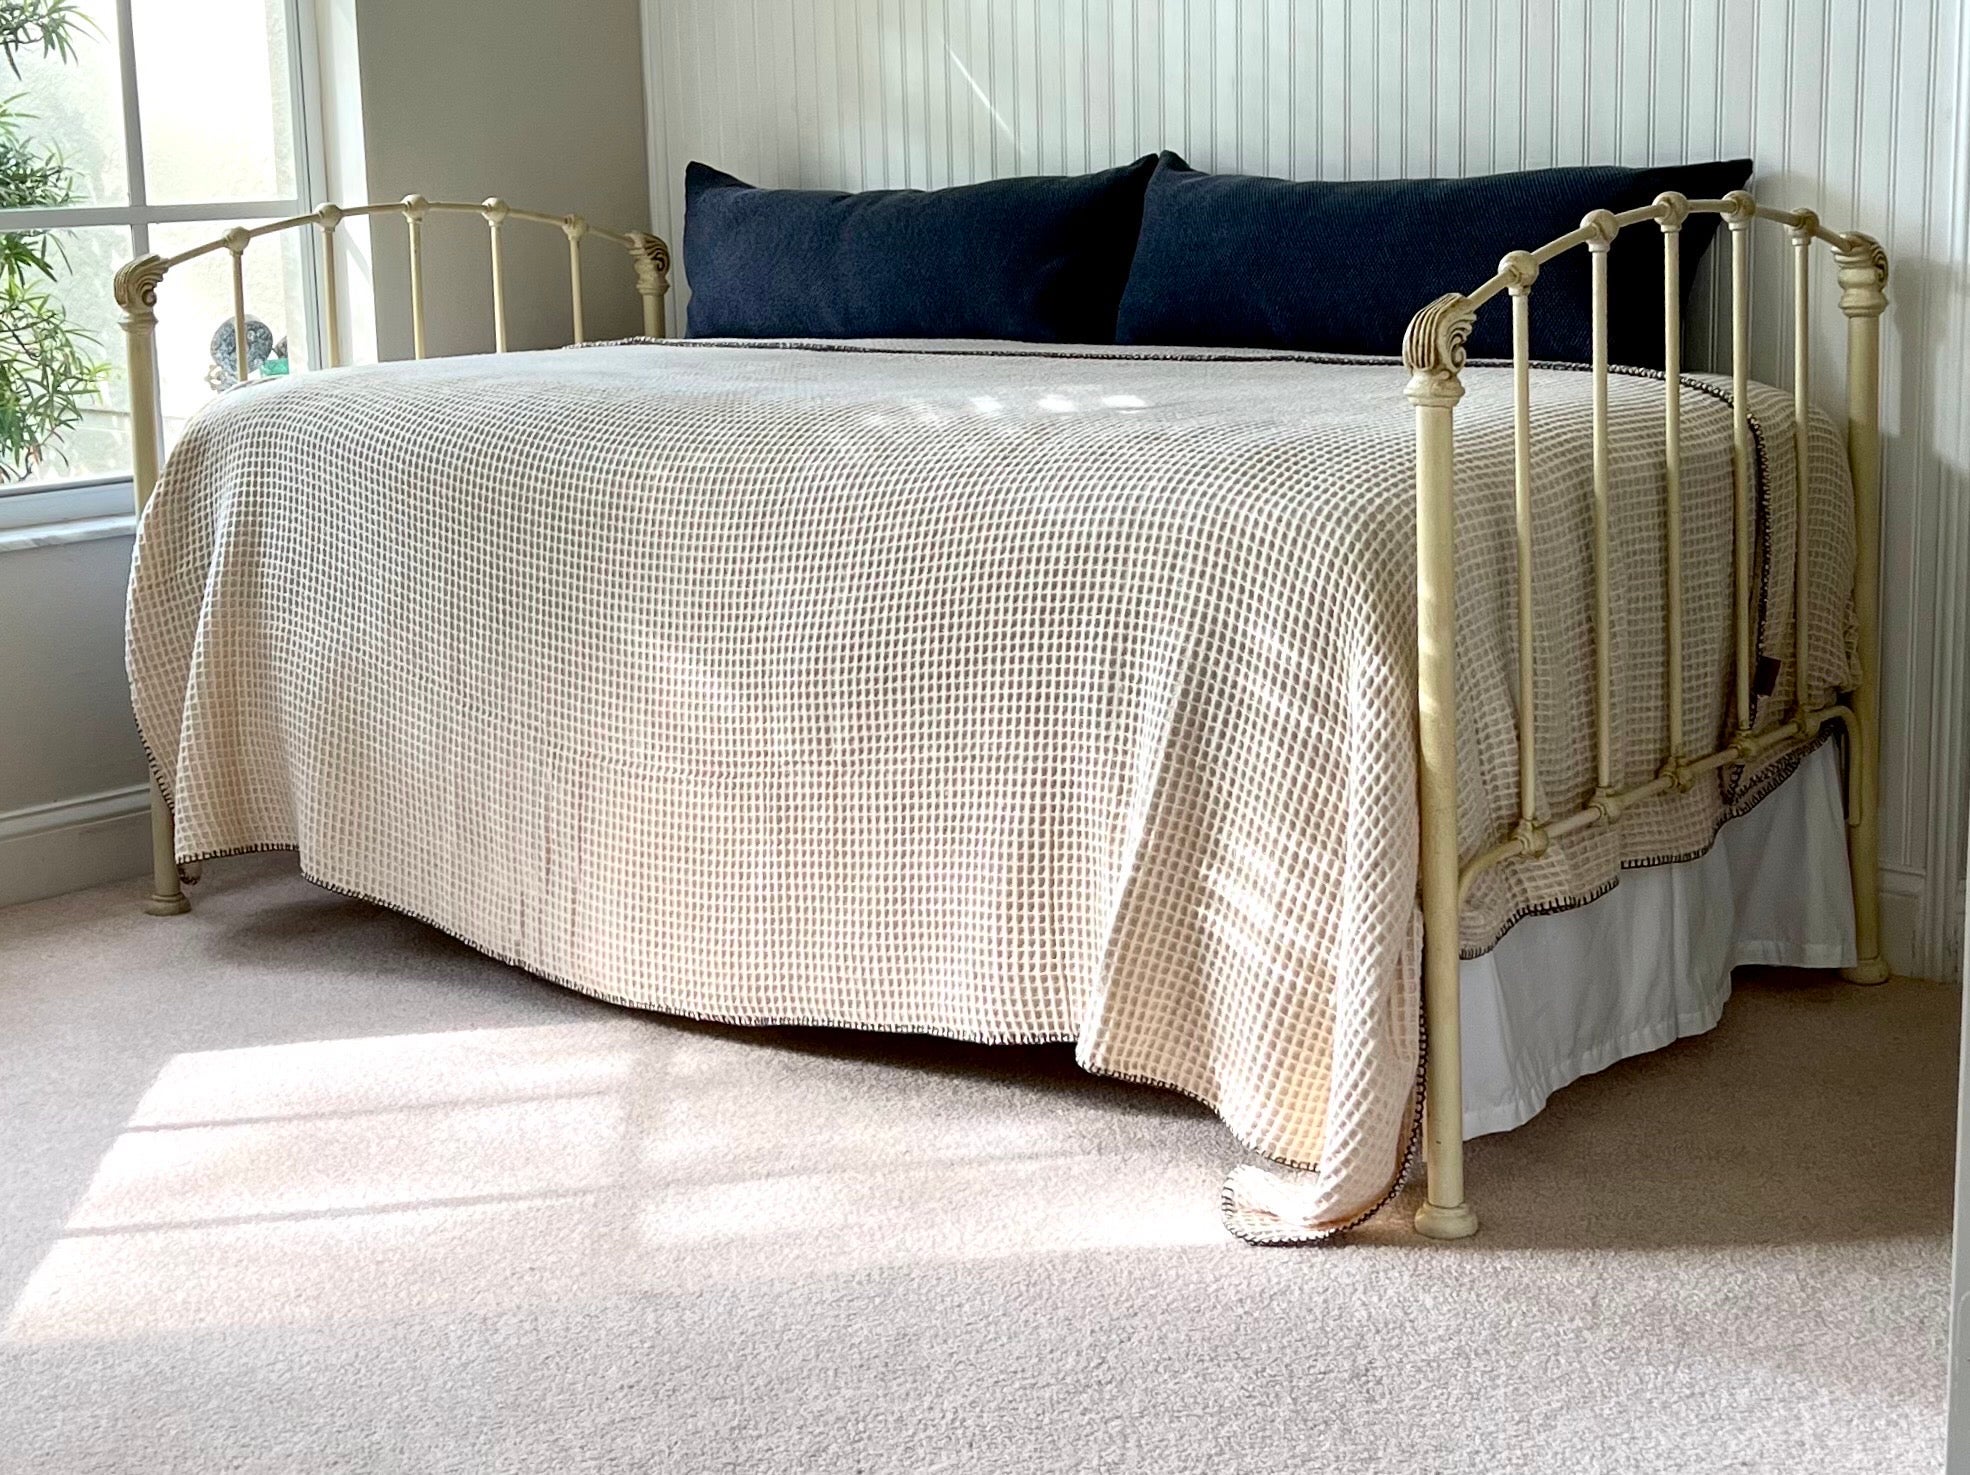 A Classic French Provincial style wrought iron single bed or day bed. The daybed / single bed has sober lines, elegant detailing and is hand painted in a pleasant cream patina. It is very sturdy and fully stable and suitable for sleeping and / or